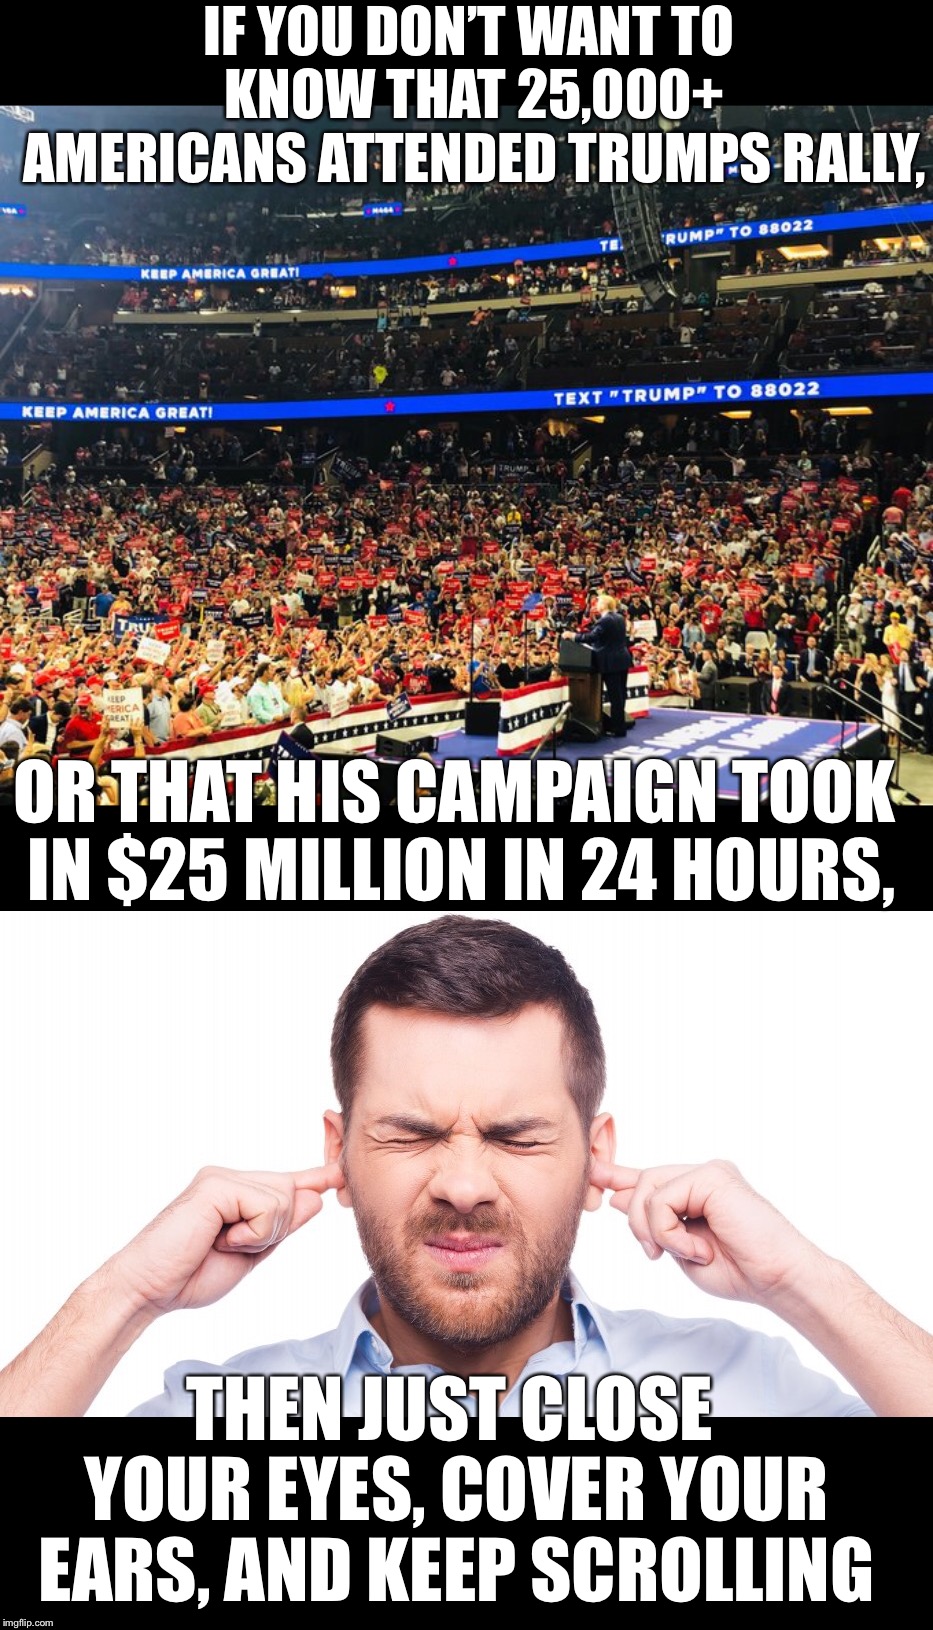 Support for Trump & his America first agenda is growing.  We’re gonna MAGA with or without you. | IF YOU DON’T WANT TO KNOW THAT 25,000+ AMERICANS ATTENDED TRUMPS RALLY, OR THAT HIS CAMPAIGN TOOK IN $25 MILLION IN 24 HOURS, THEN JUST CLOSE YOUR EYES, COVER YOUR EARS, AND KEEP SCROLLING | image tagged in maga | made w/ Imgflip meme maker